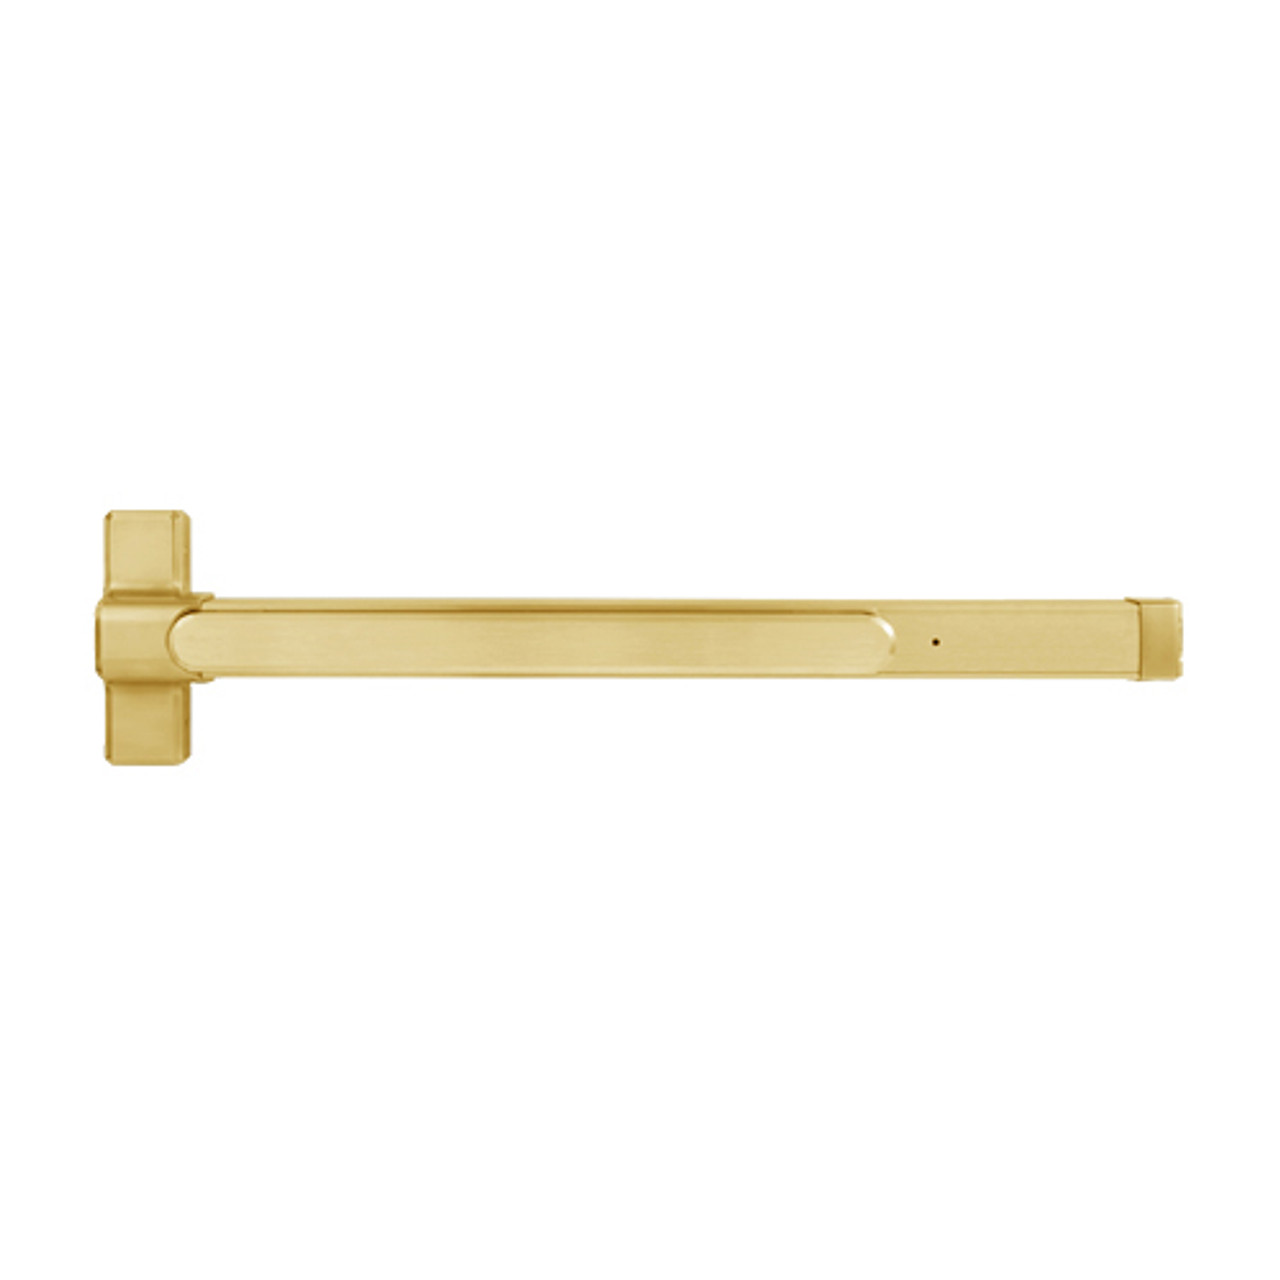 QED117LR-36-7-605 Stanley QED100 Series Heavy Duty Surface Vertical Rod Hex Dog Exit Device in Bright Brass Finish